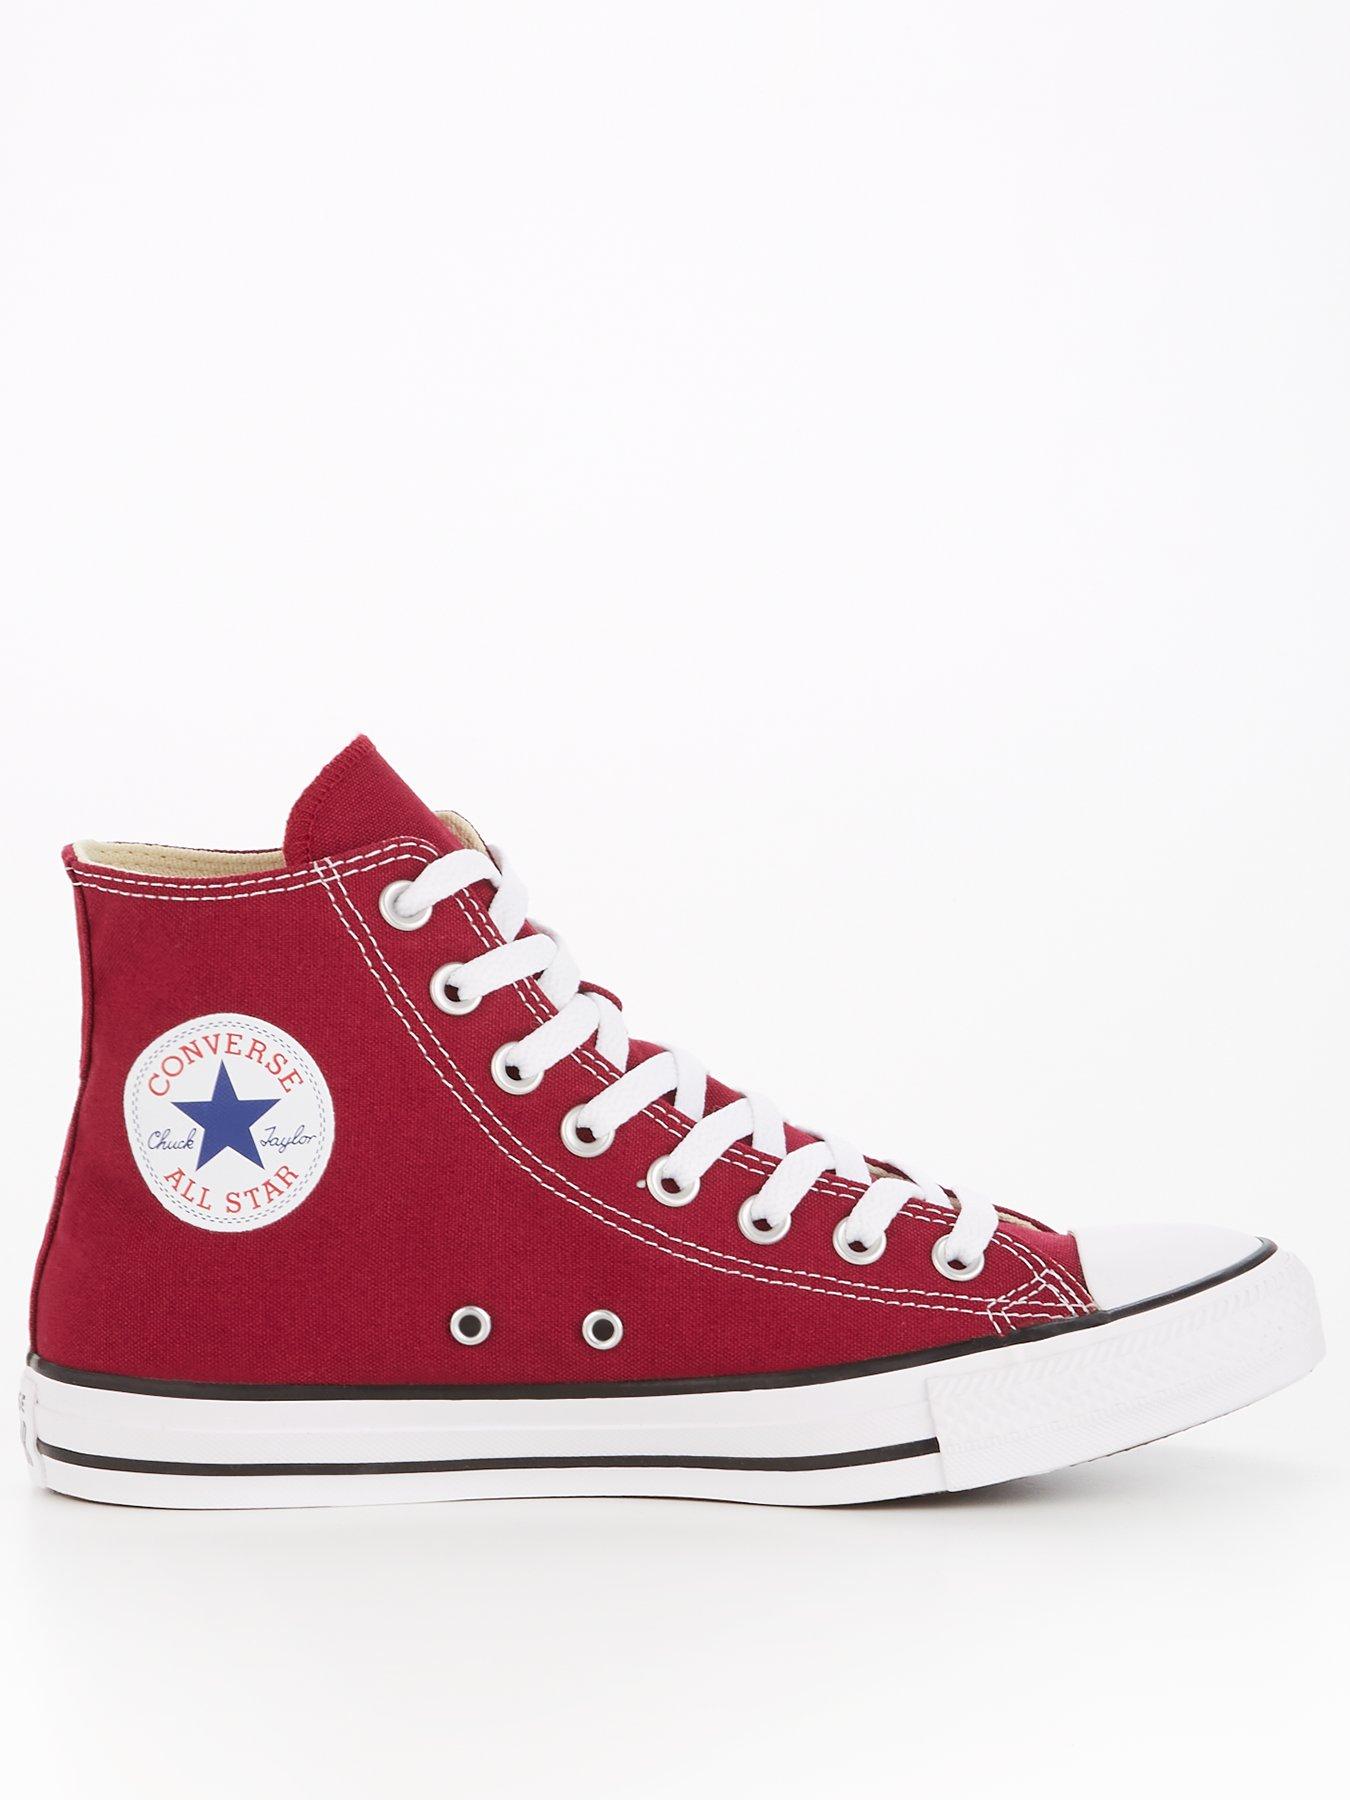 size 12 converse high tops